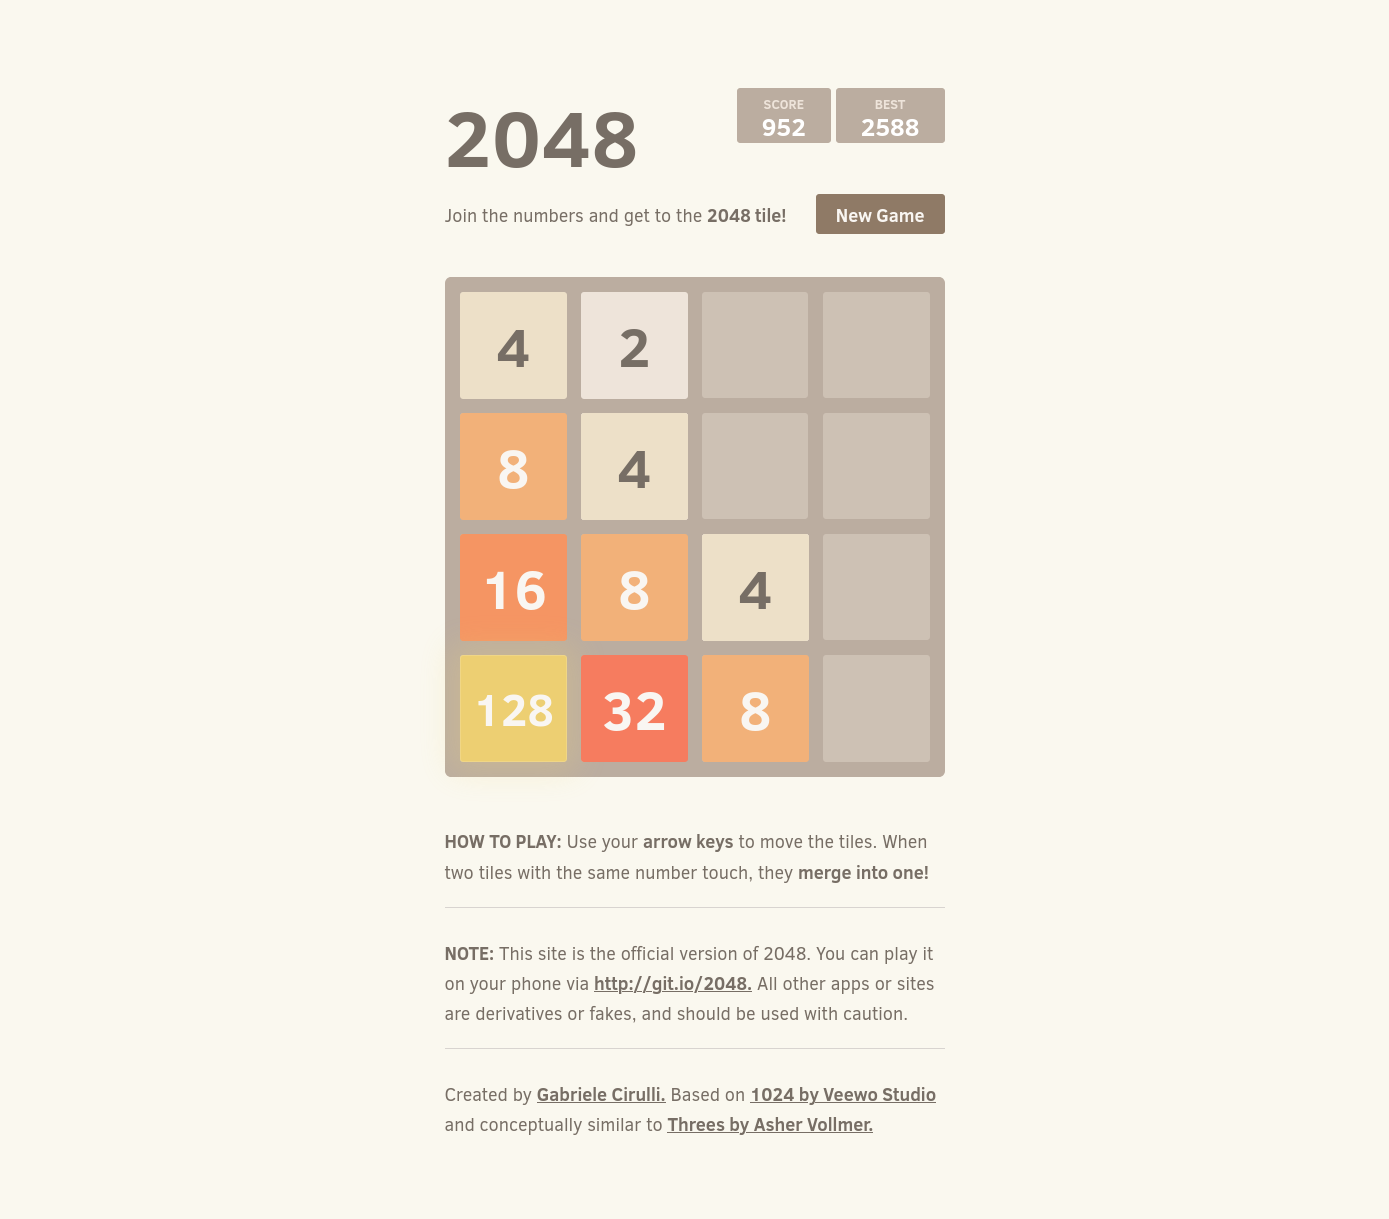 Viewing the final 2048 game